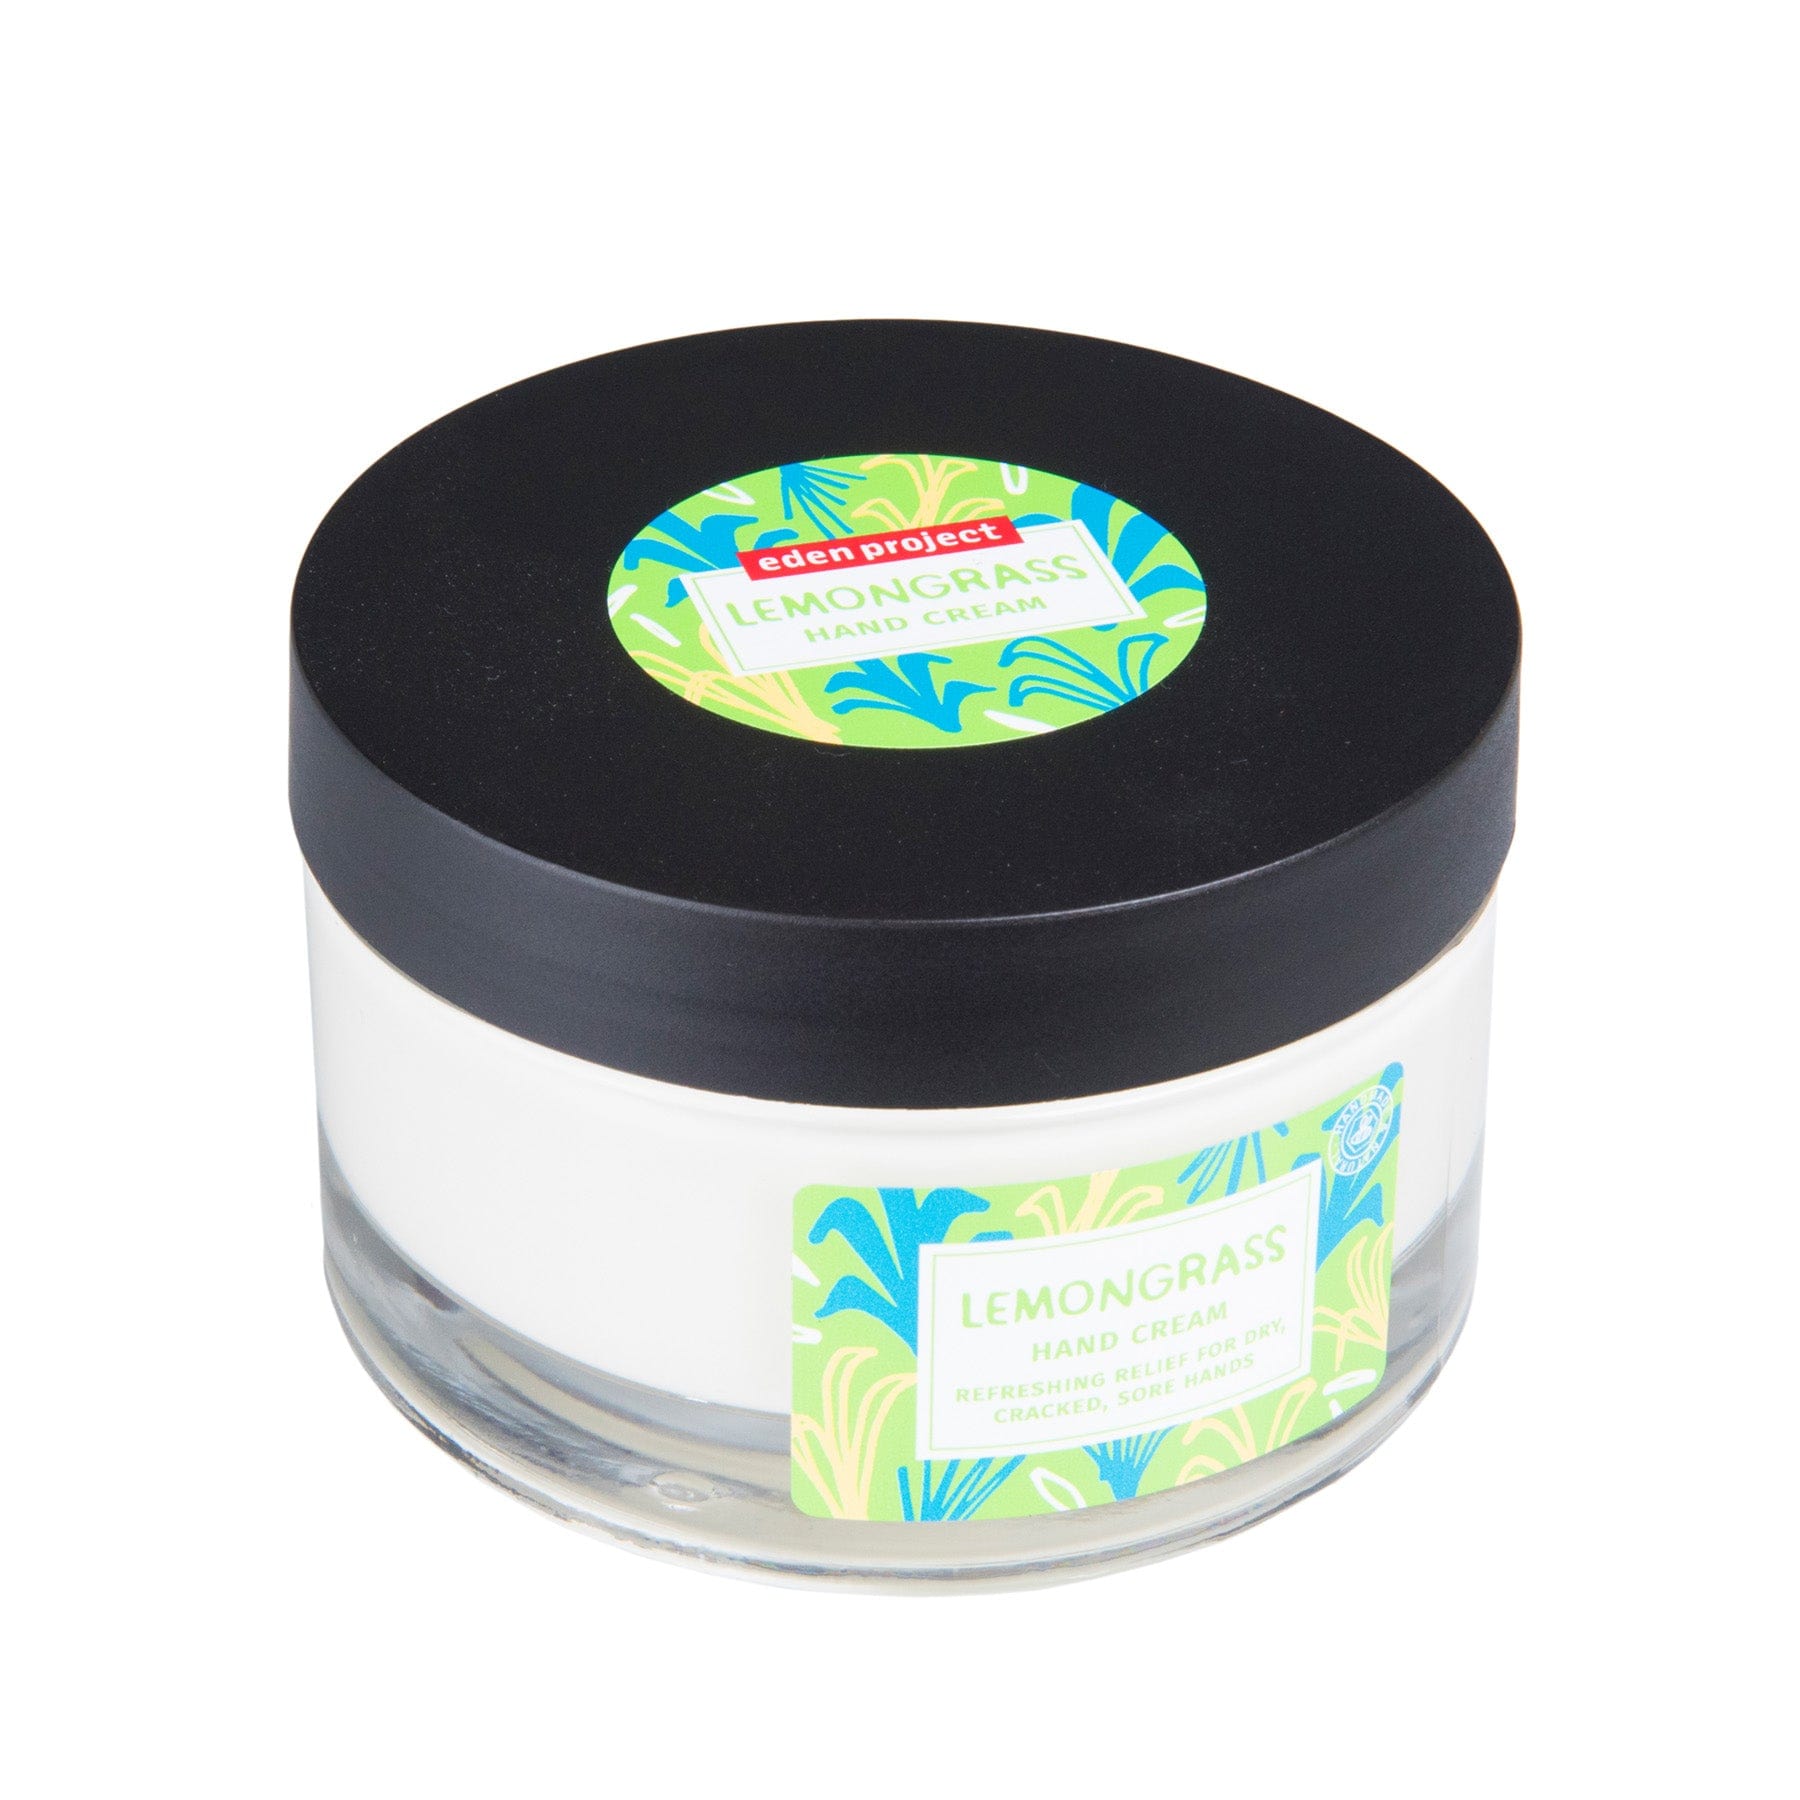 Lemongrass hand cream jar with green and blue label, Eden Project skincare product, natural moisturizer for dry hands